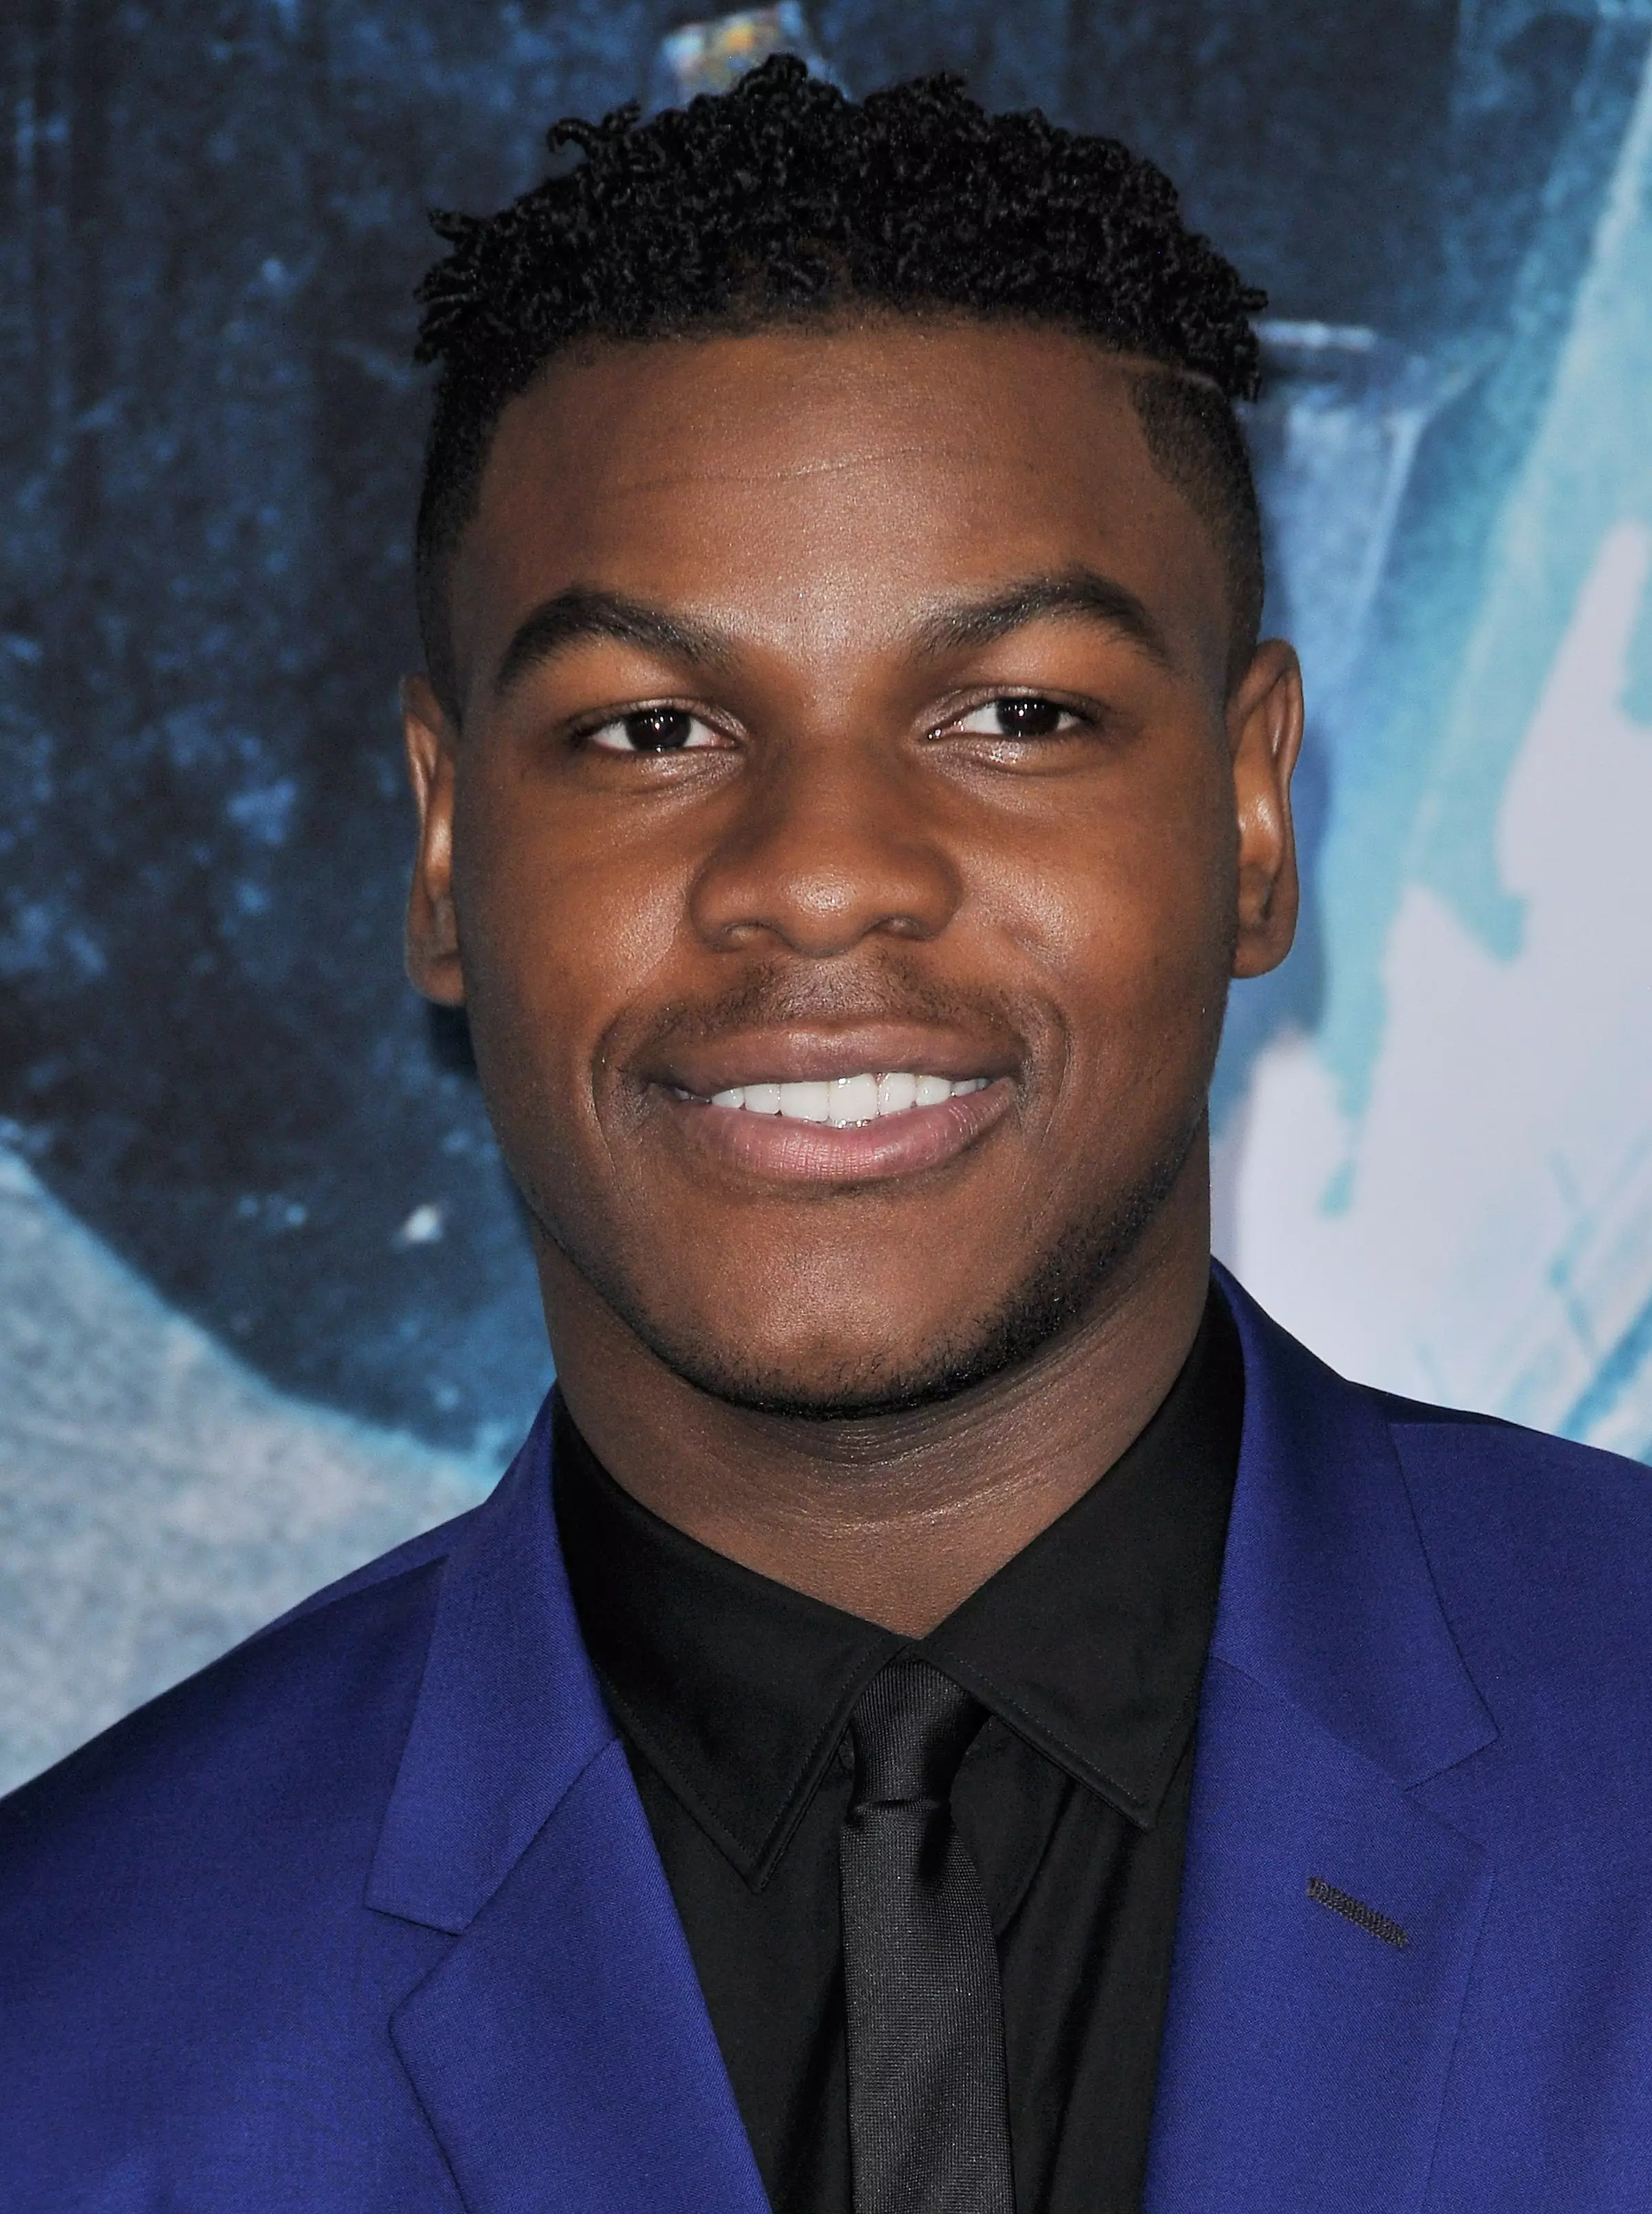 One of the film's stars, John Boyega, has confirmed when the next film will be set.